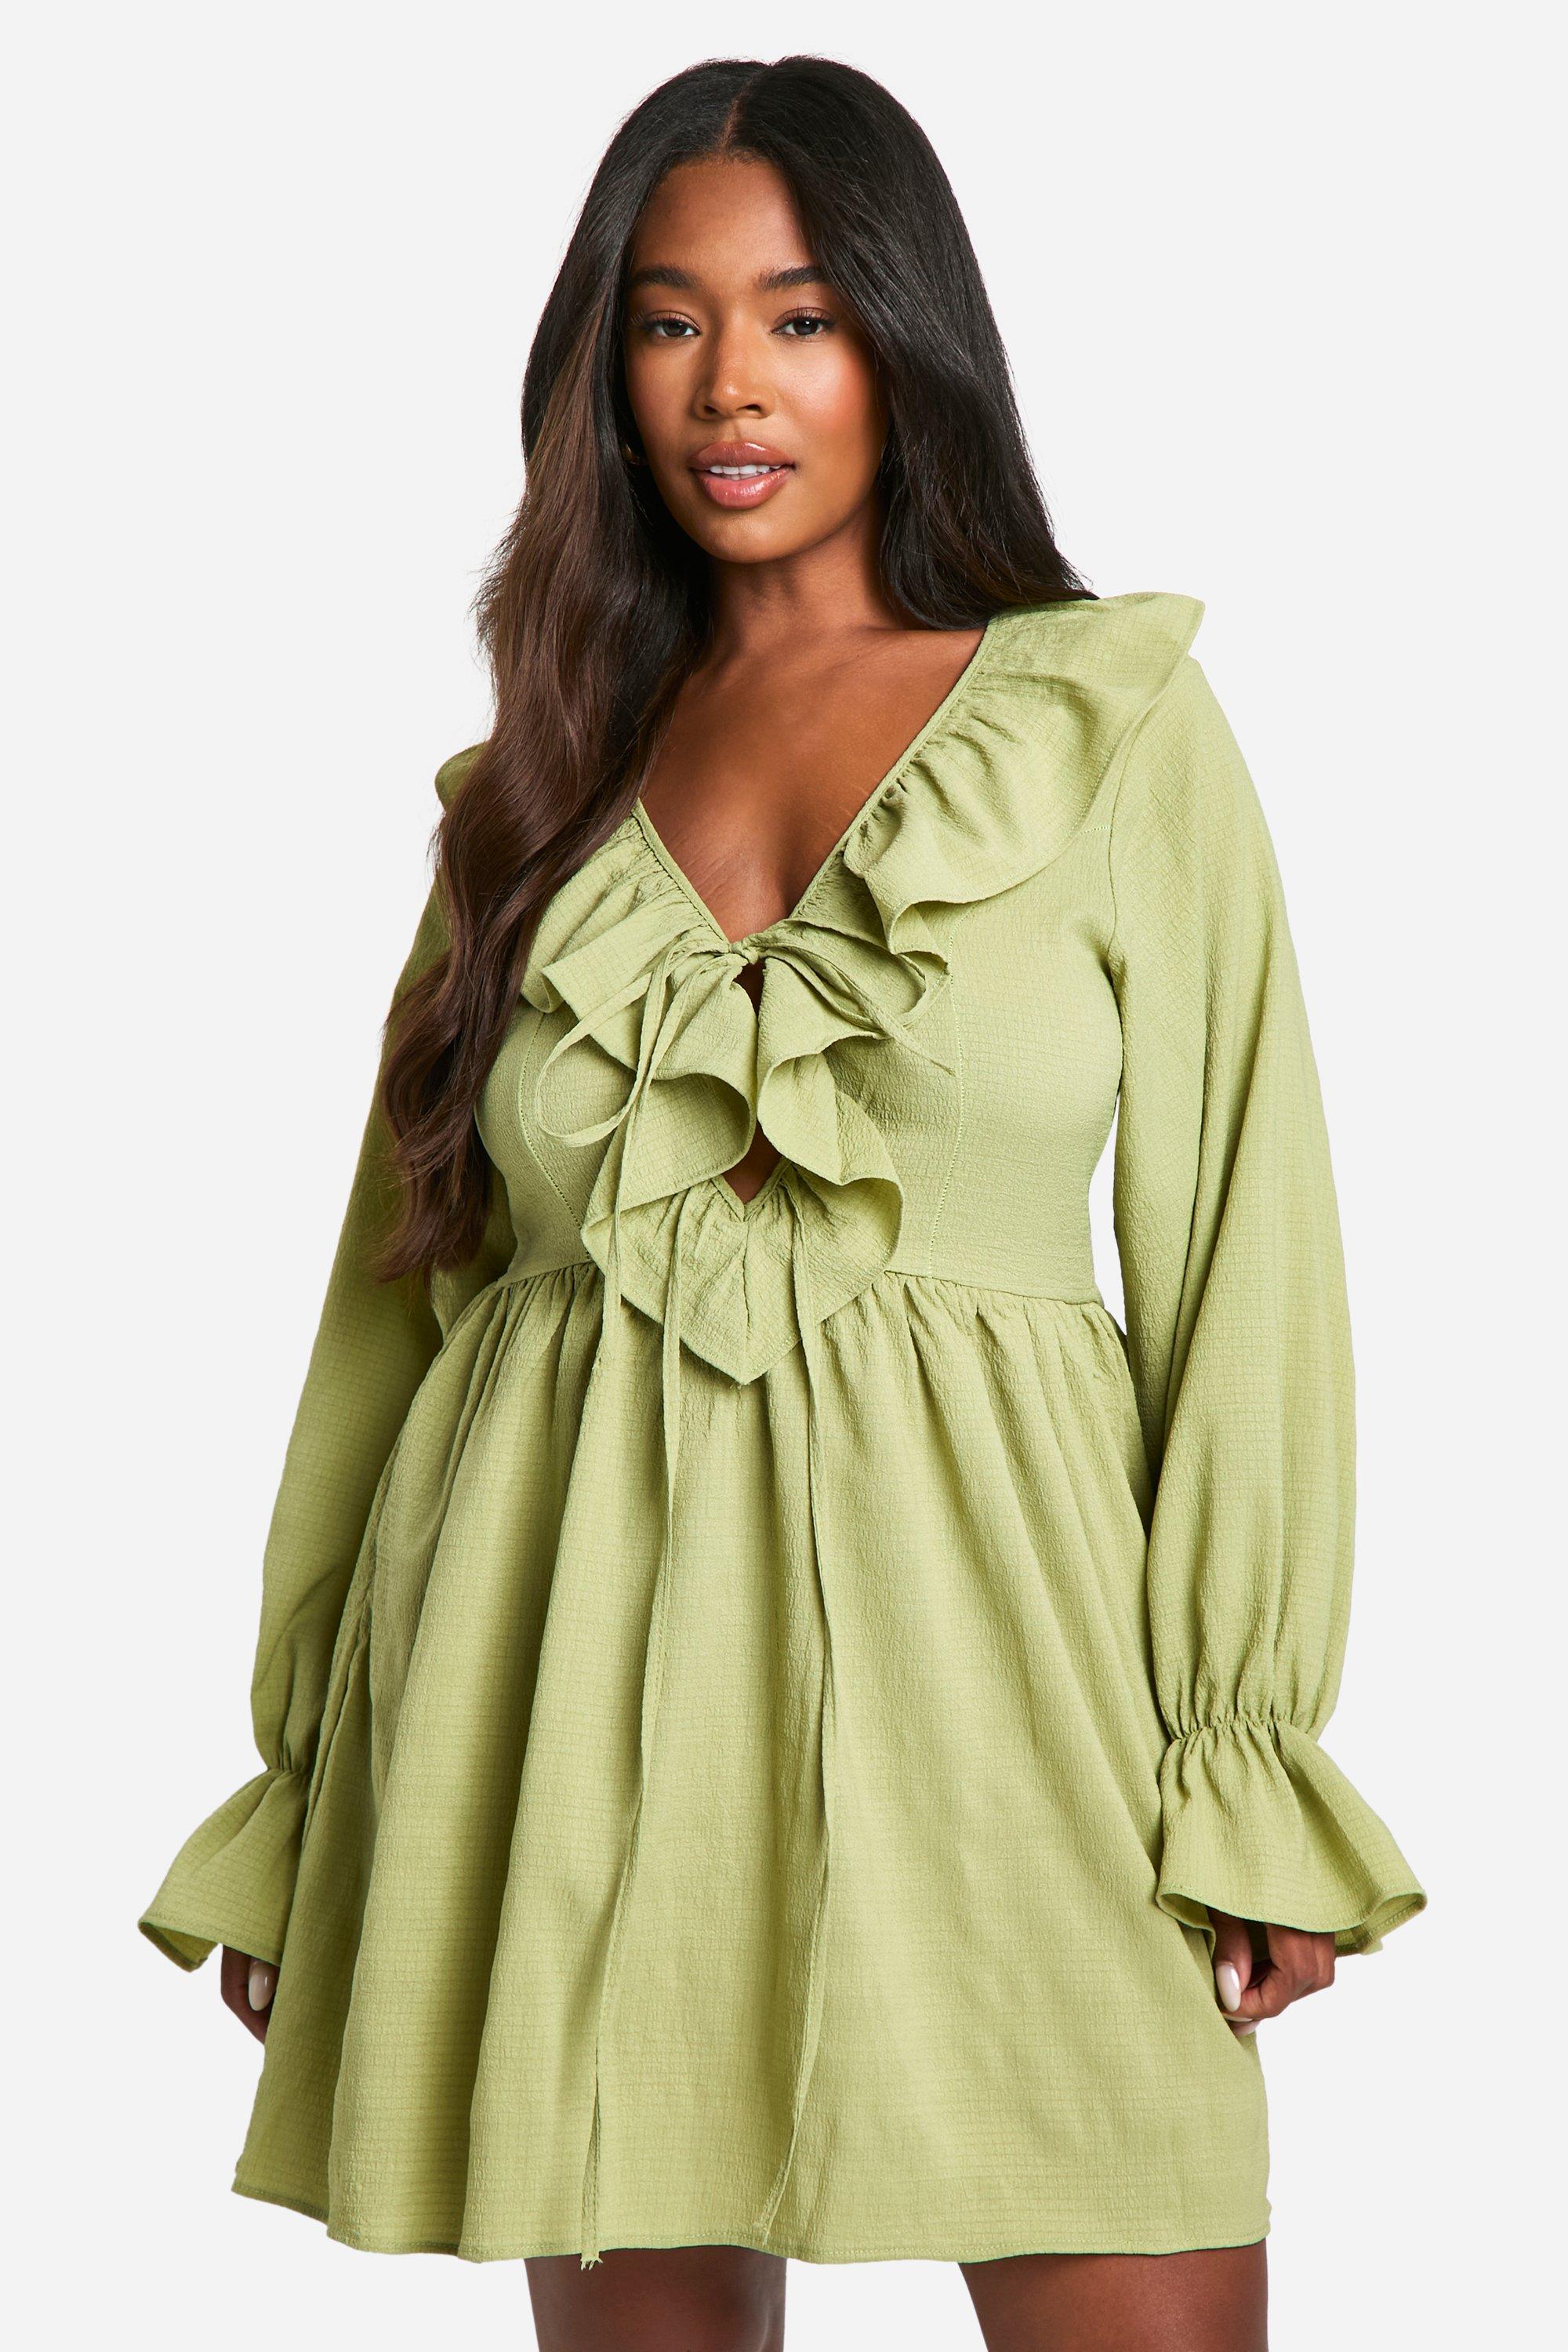 Boohoo Plus Textured Woven Frill Skater Dress, Olive